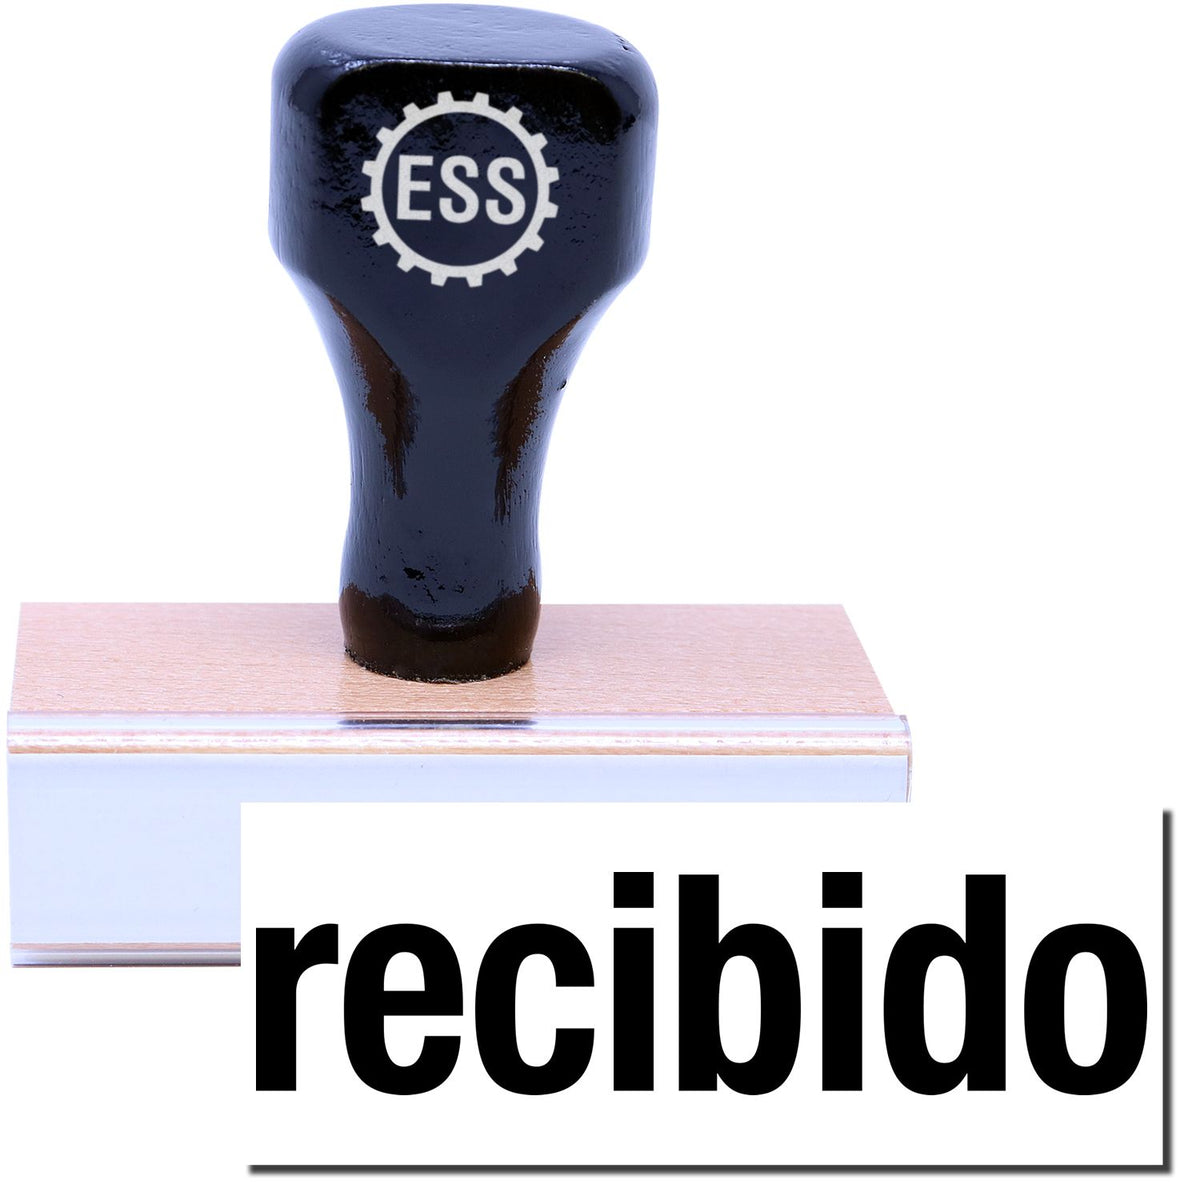 A stock office rubber stamp with a stamped image showing how the text &quot;recibido&quot; in bold font is displayed after stamping.